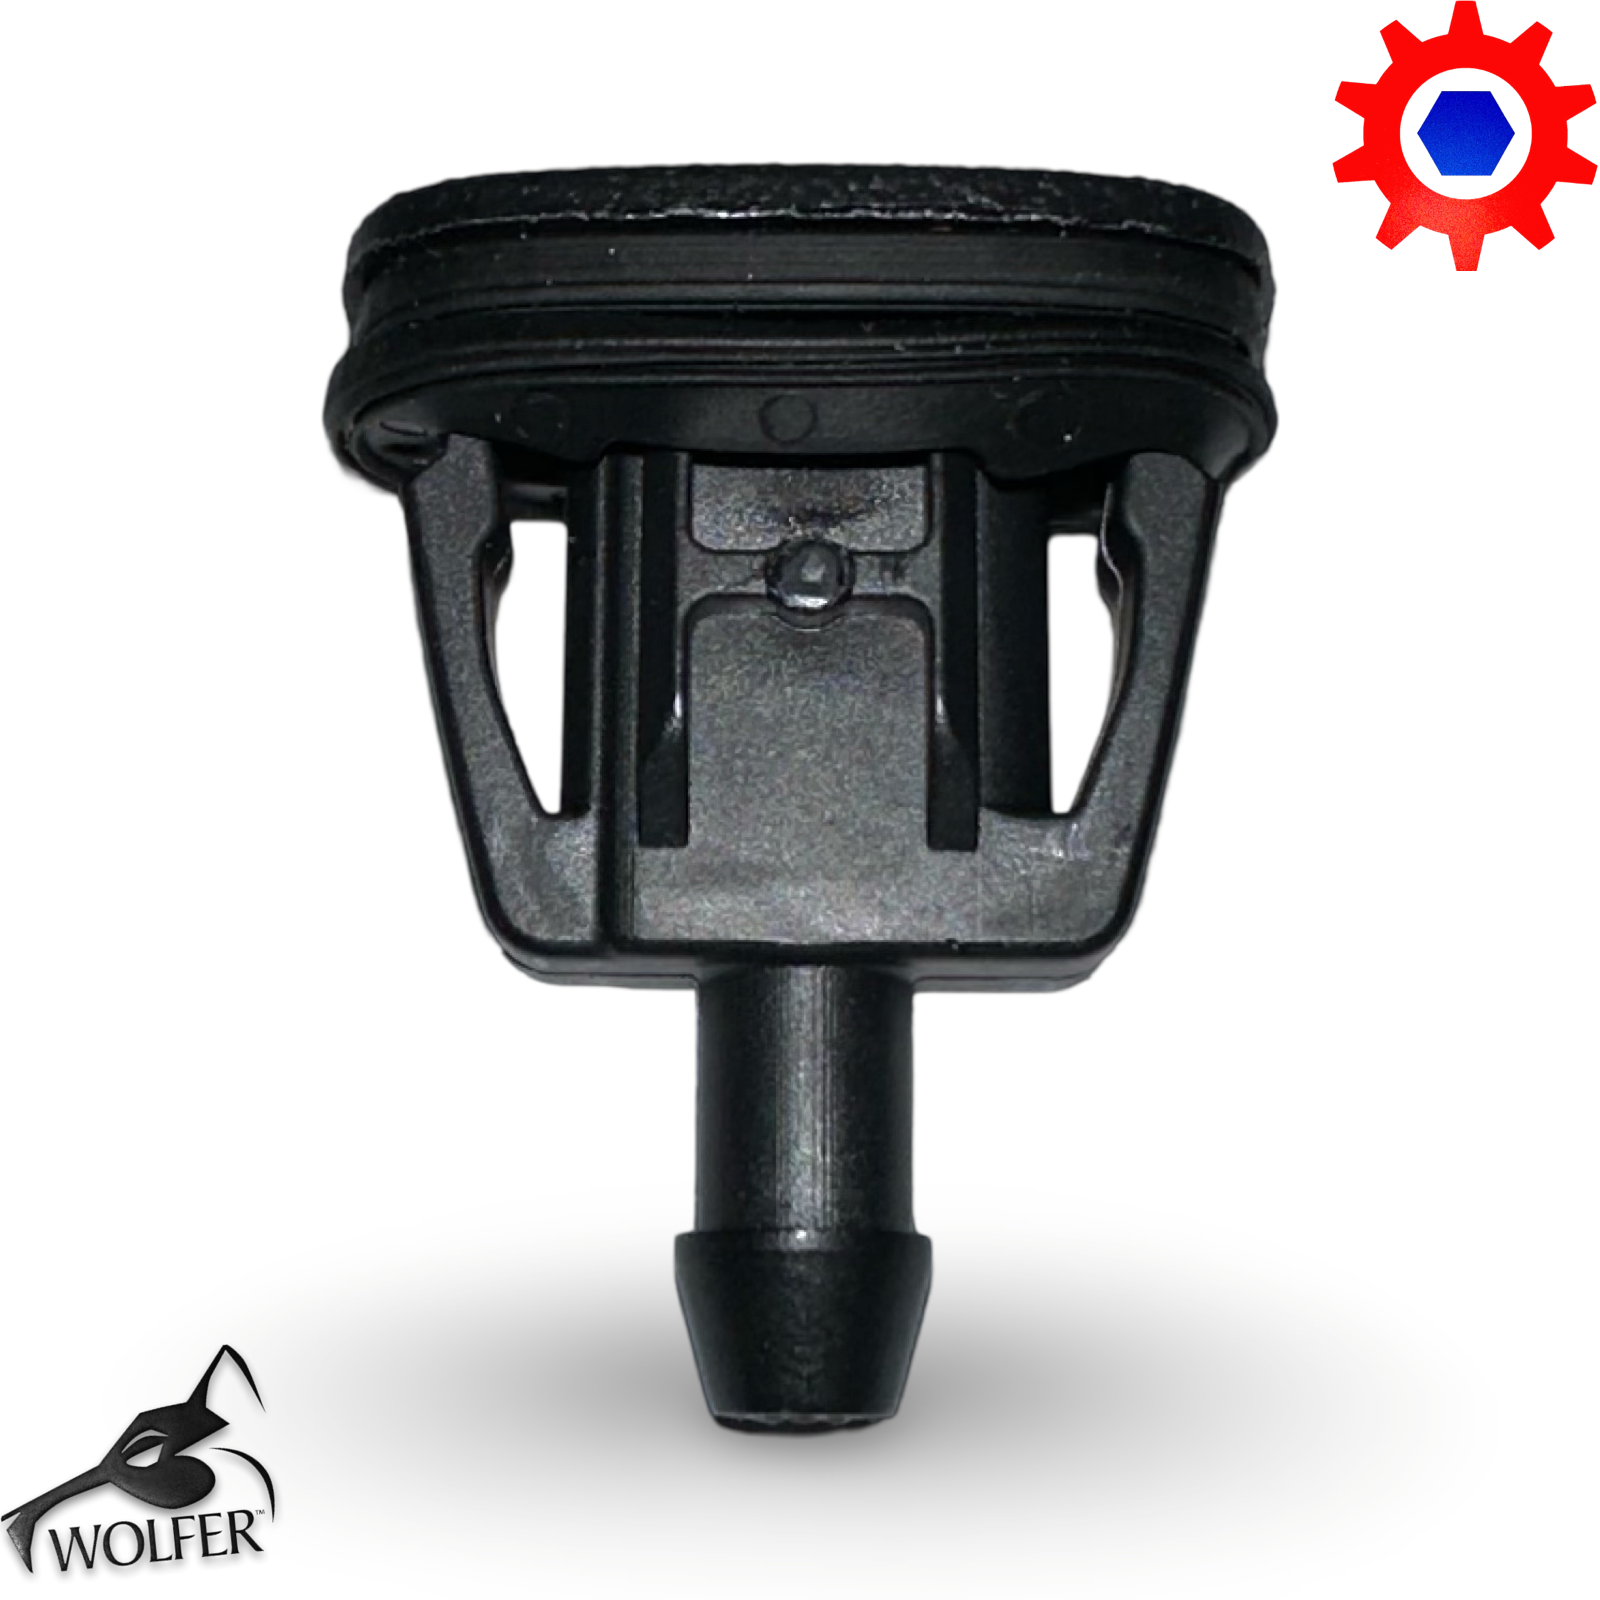 Nozzle Asm., WS. Washer Fluid(Up-Armored HMMWV) 2540-01-596-1571 13013705